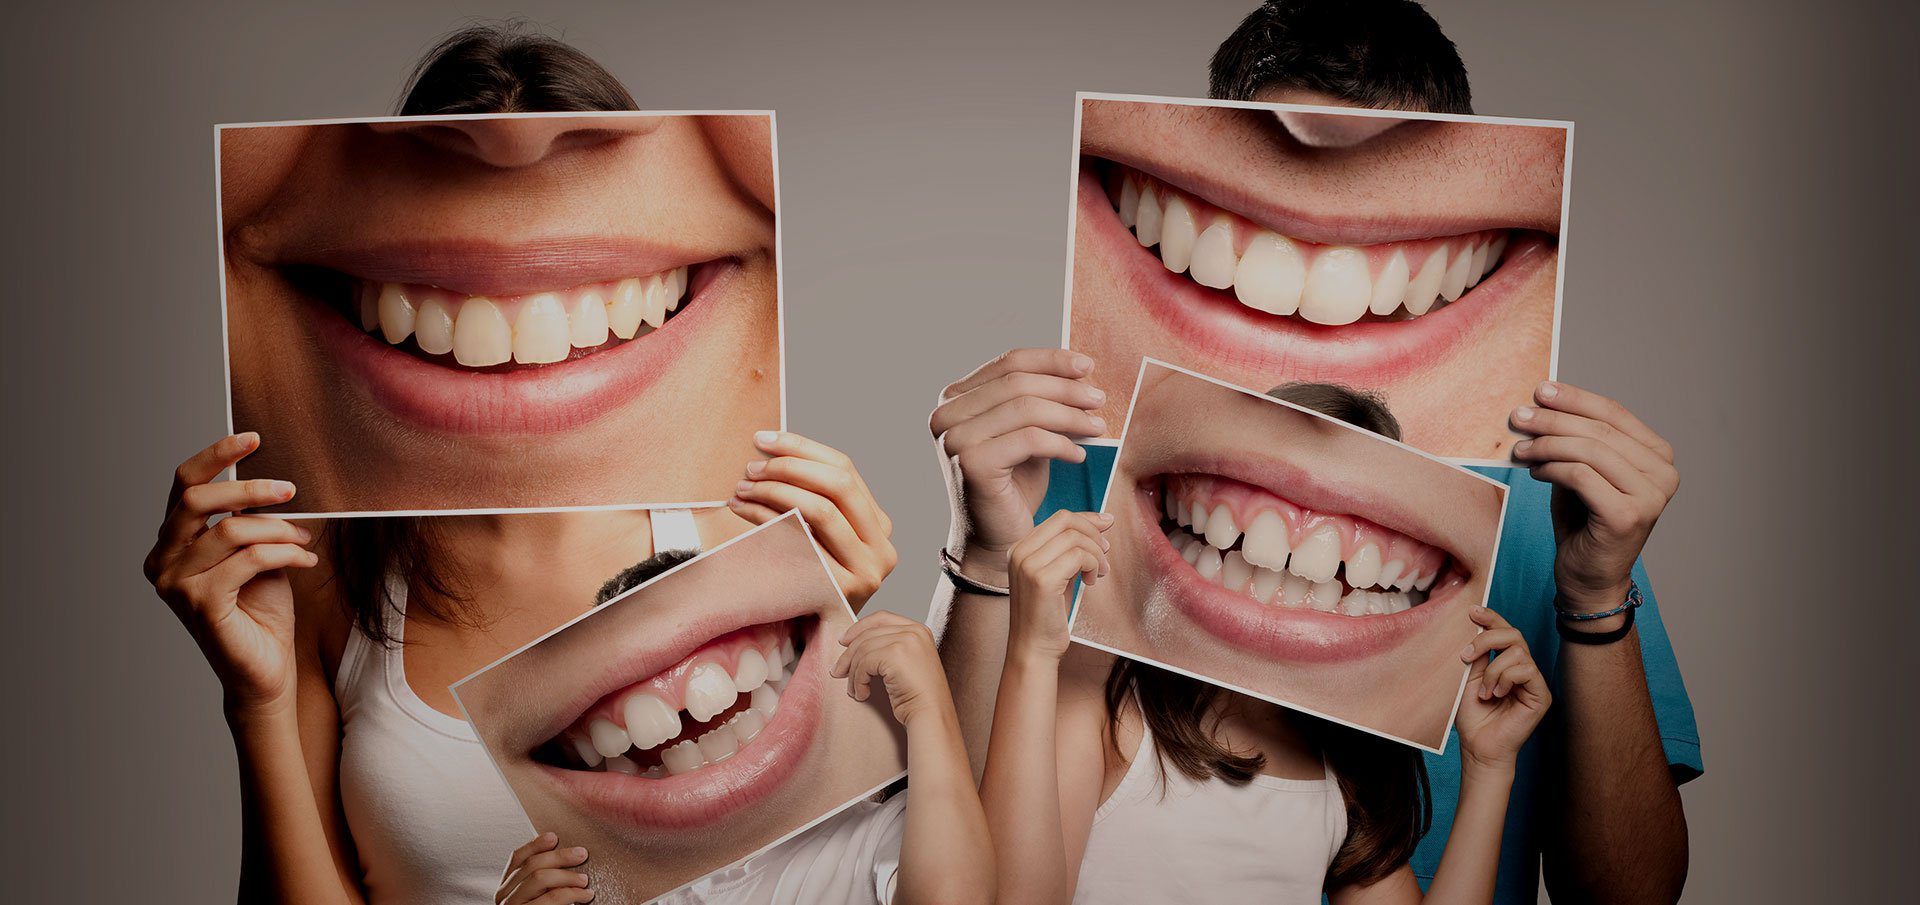 People holding up photos of smiles - benefits of a dentist